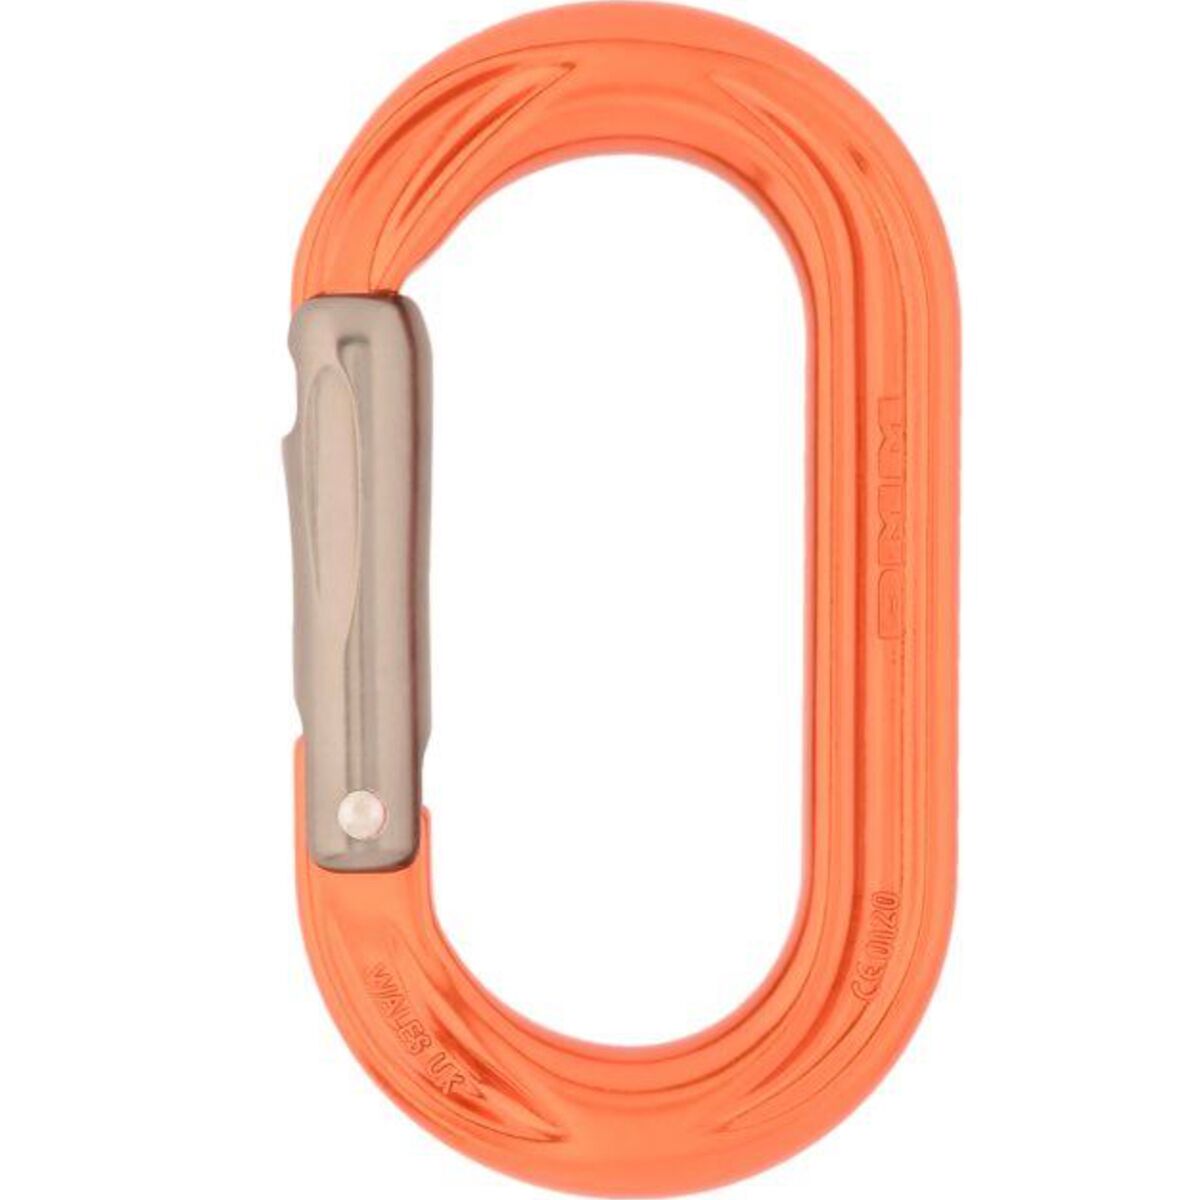 DMM PerfectO Straight Gate Carabiner